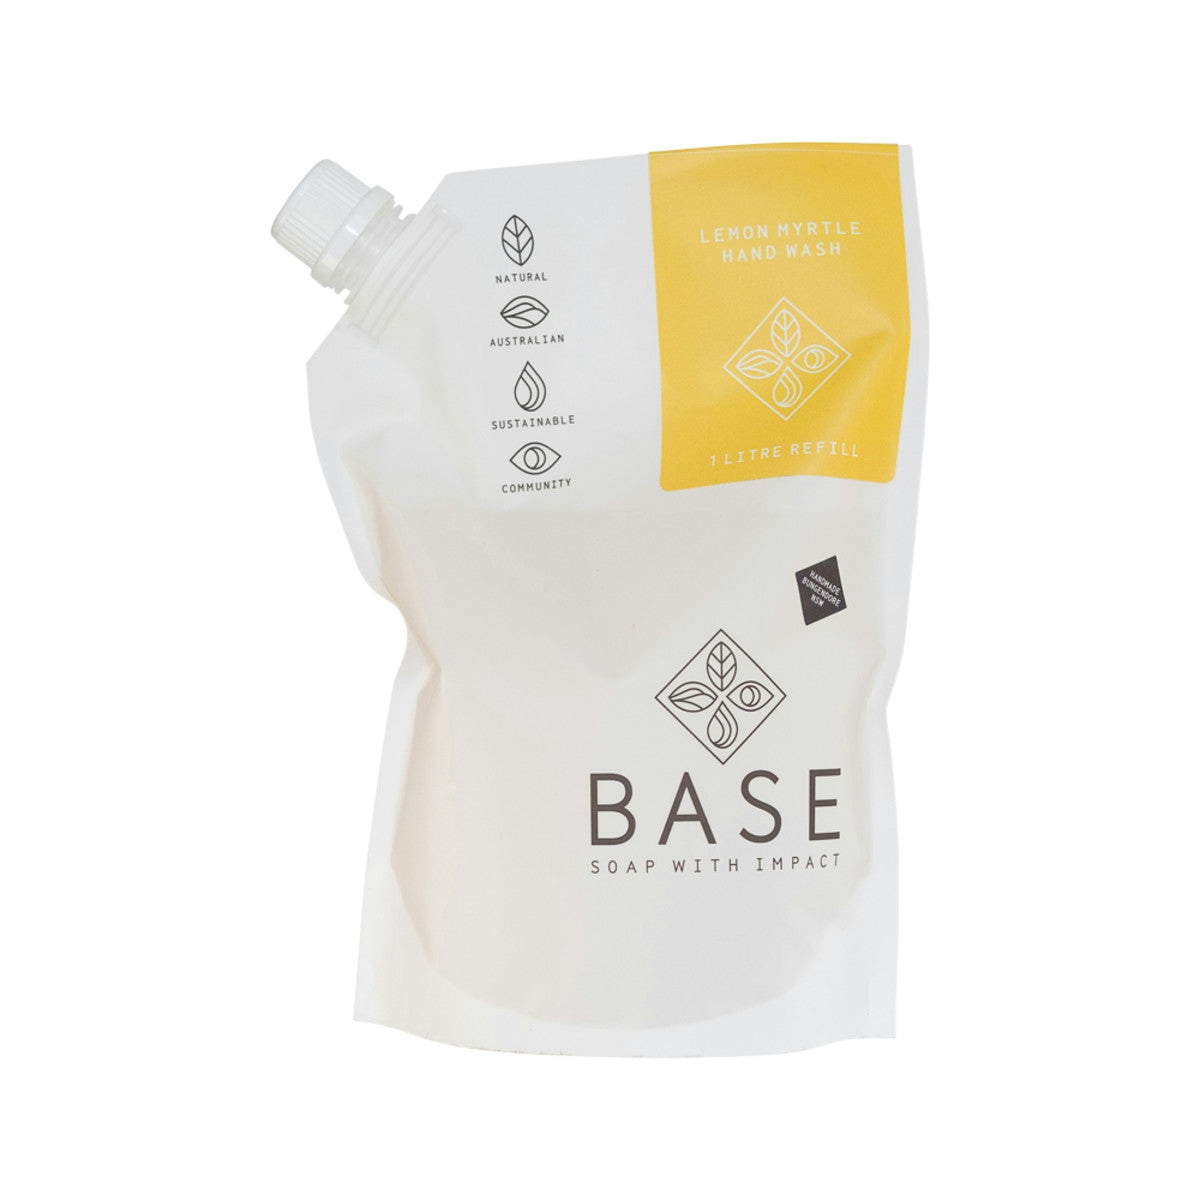 image of Base (Soap With Impact) Hand Wash Lemon Myrtle Refill 1L on white background